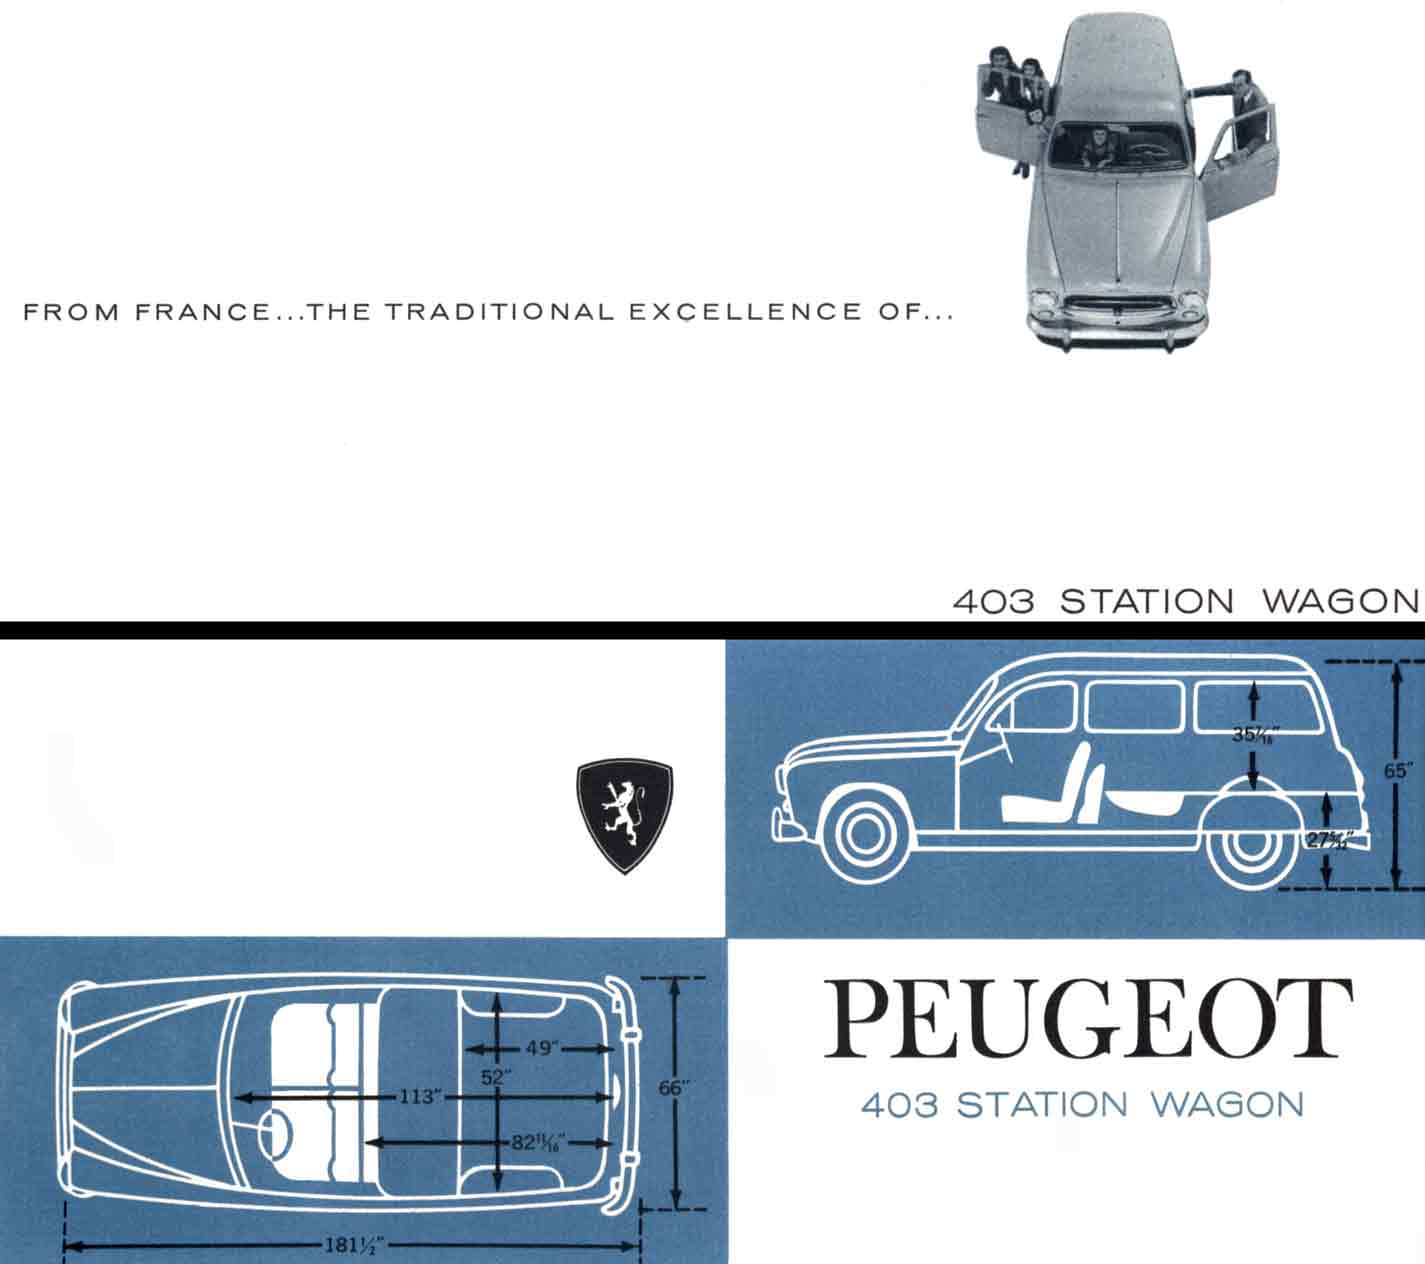 Peugeot 403 Station Wagon 1960 - From France - The Traditional Excellence of Peugeot